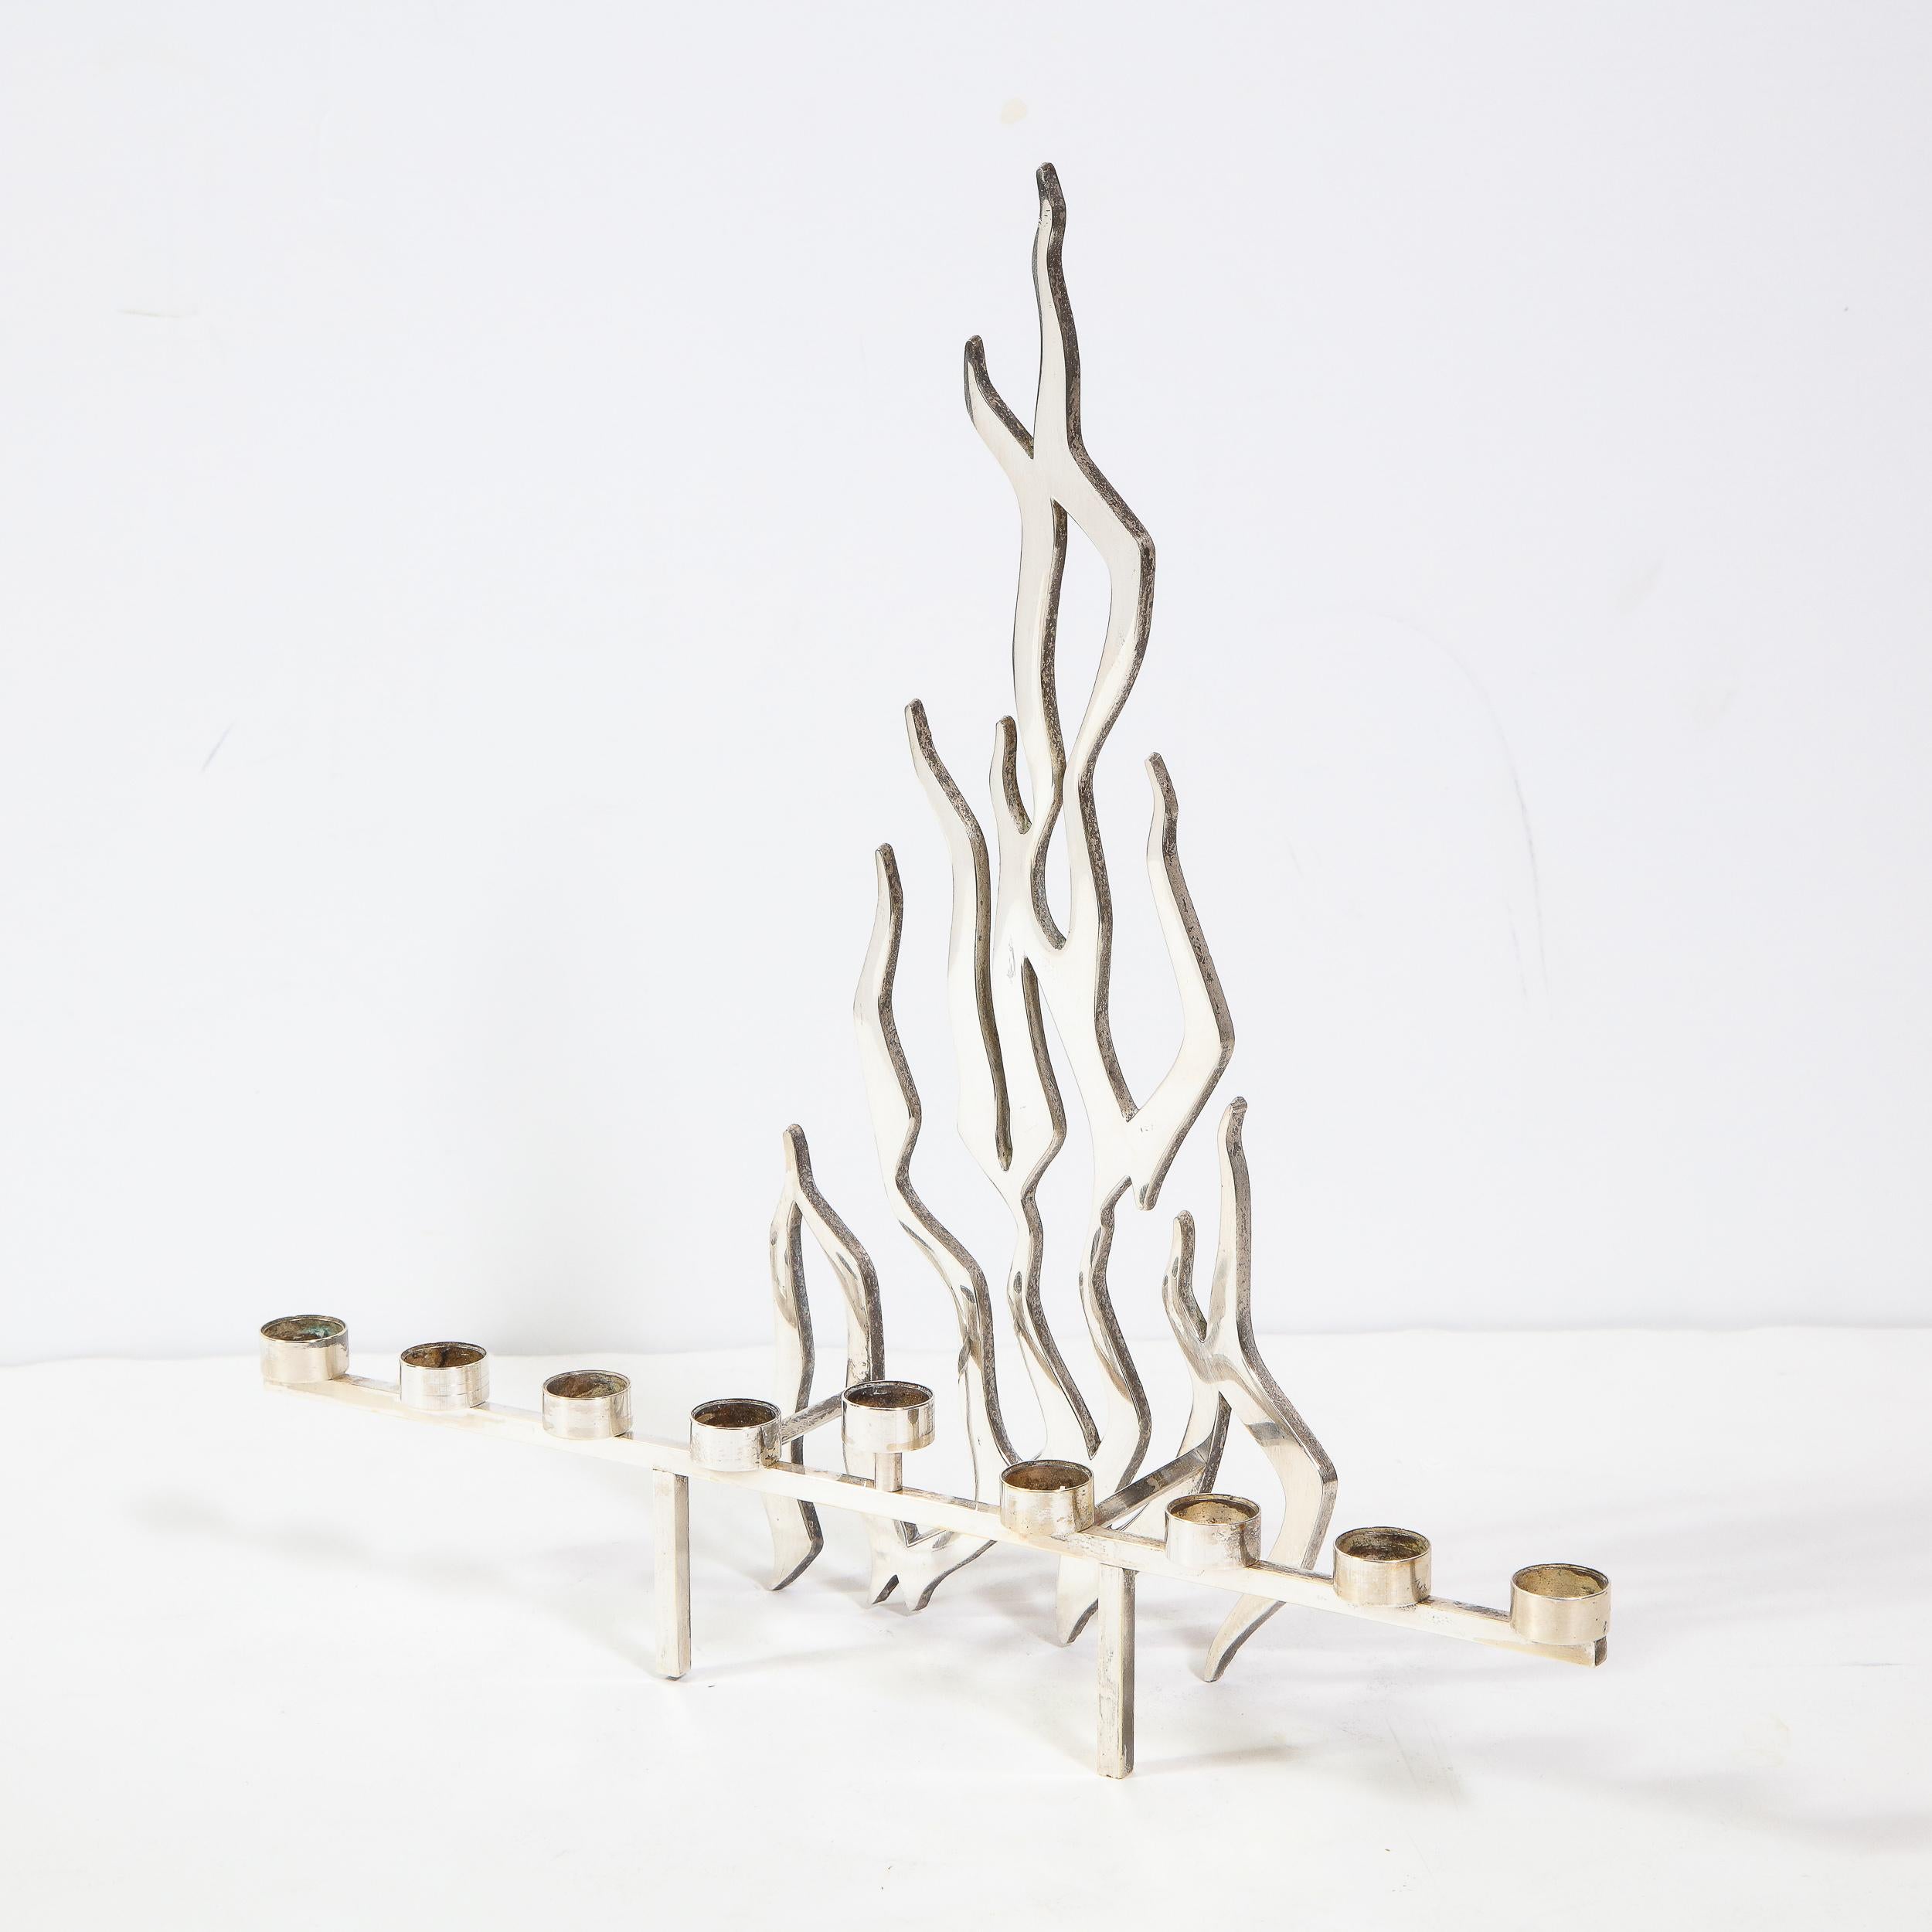 This stunning and graphic Mid-Century Modern Brutalist menorah was realized in Israel, circa 1960. Fabricated in silver plate, it features a candelabra stand composed of nine cylindrical candle holders (the center one appears raised via a